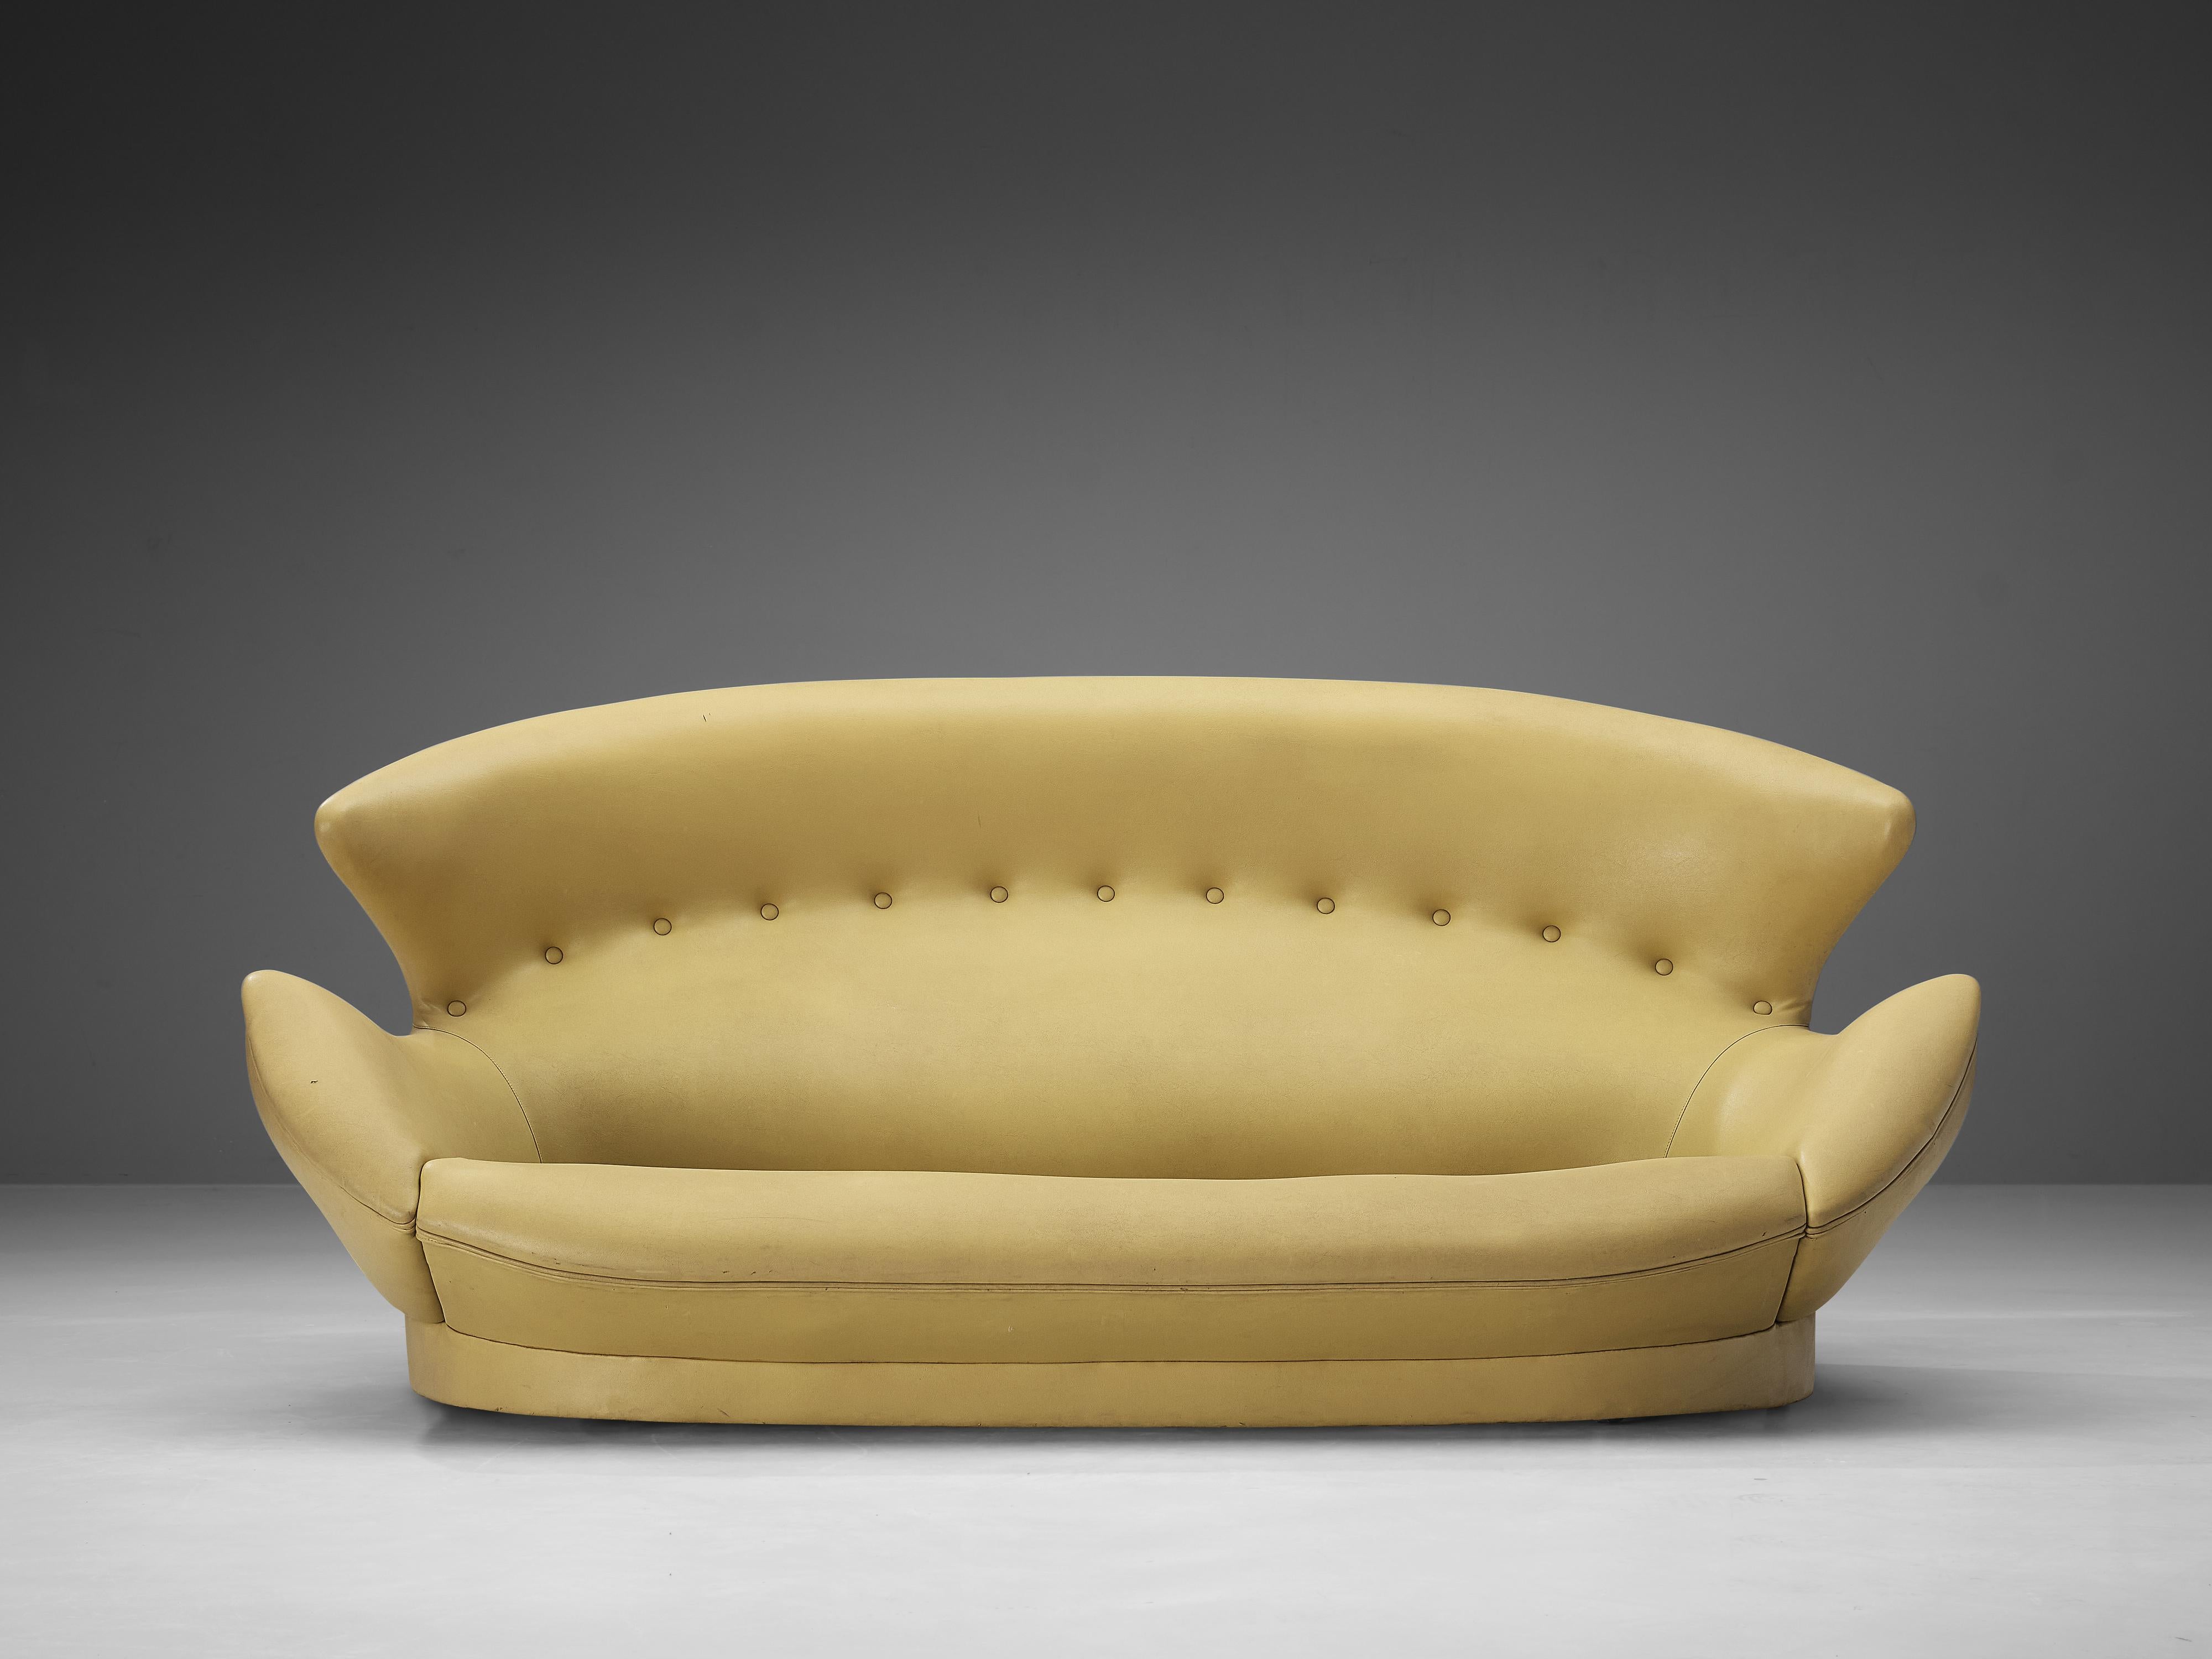 Italian sofa, leatherette, oak, Italy, 1970s

Comfortable winged sofa in yellow faux-leather upholstery. The rounded overall shape of the piece, with the wings reaching towards the armrests, makes sure that the sofa almost hugs the seaters. 